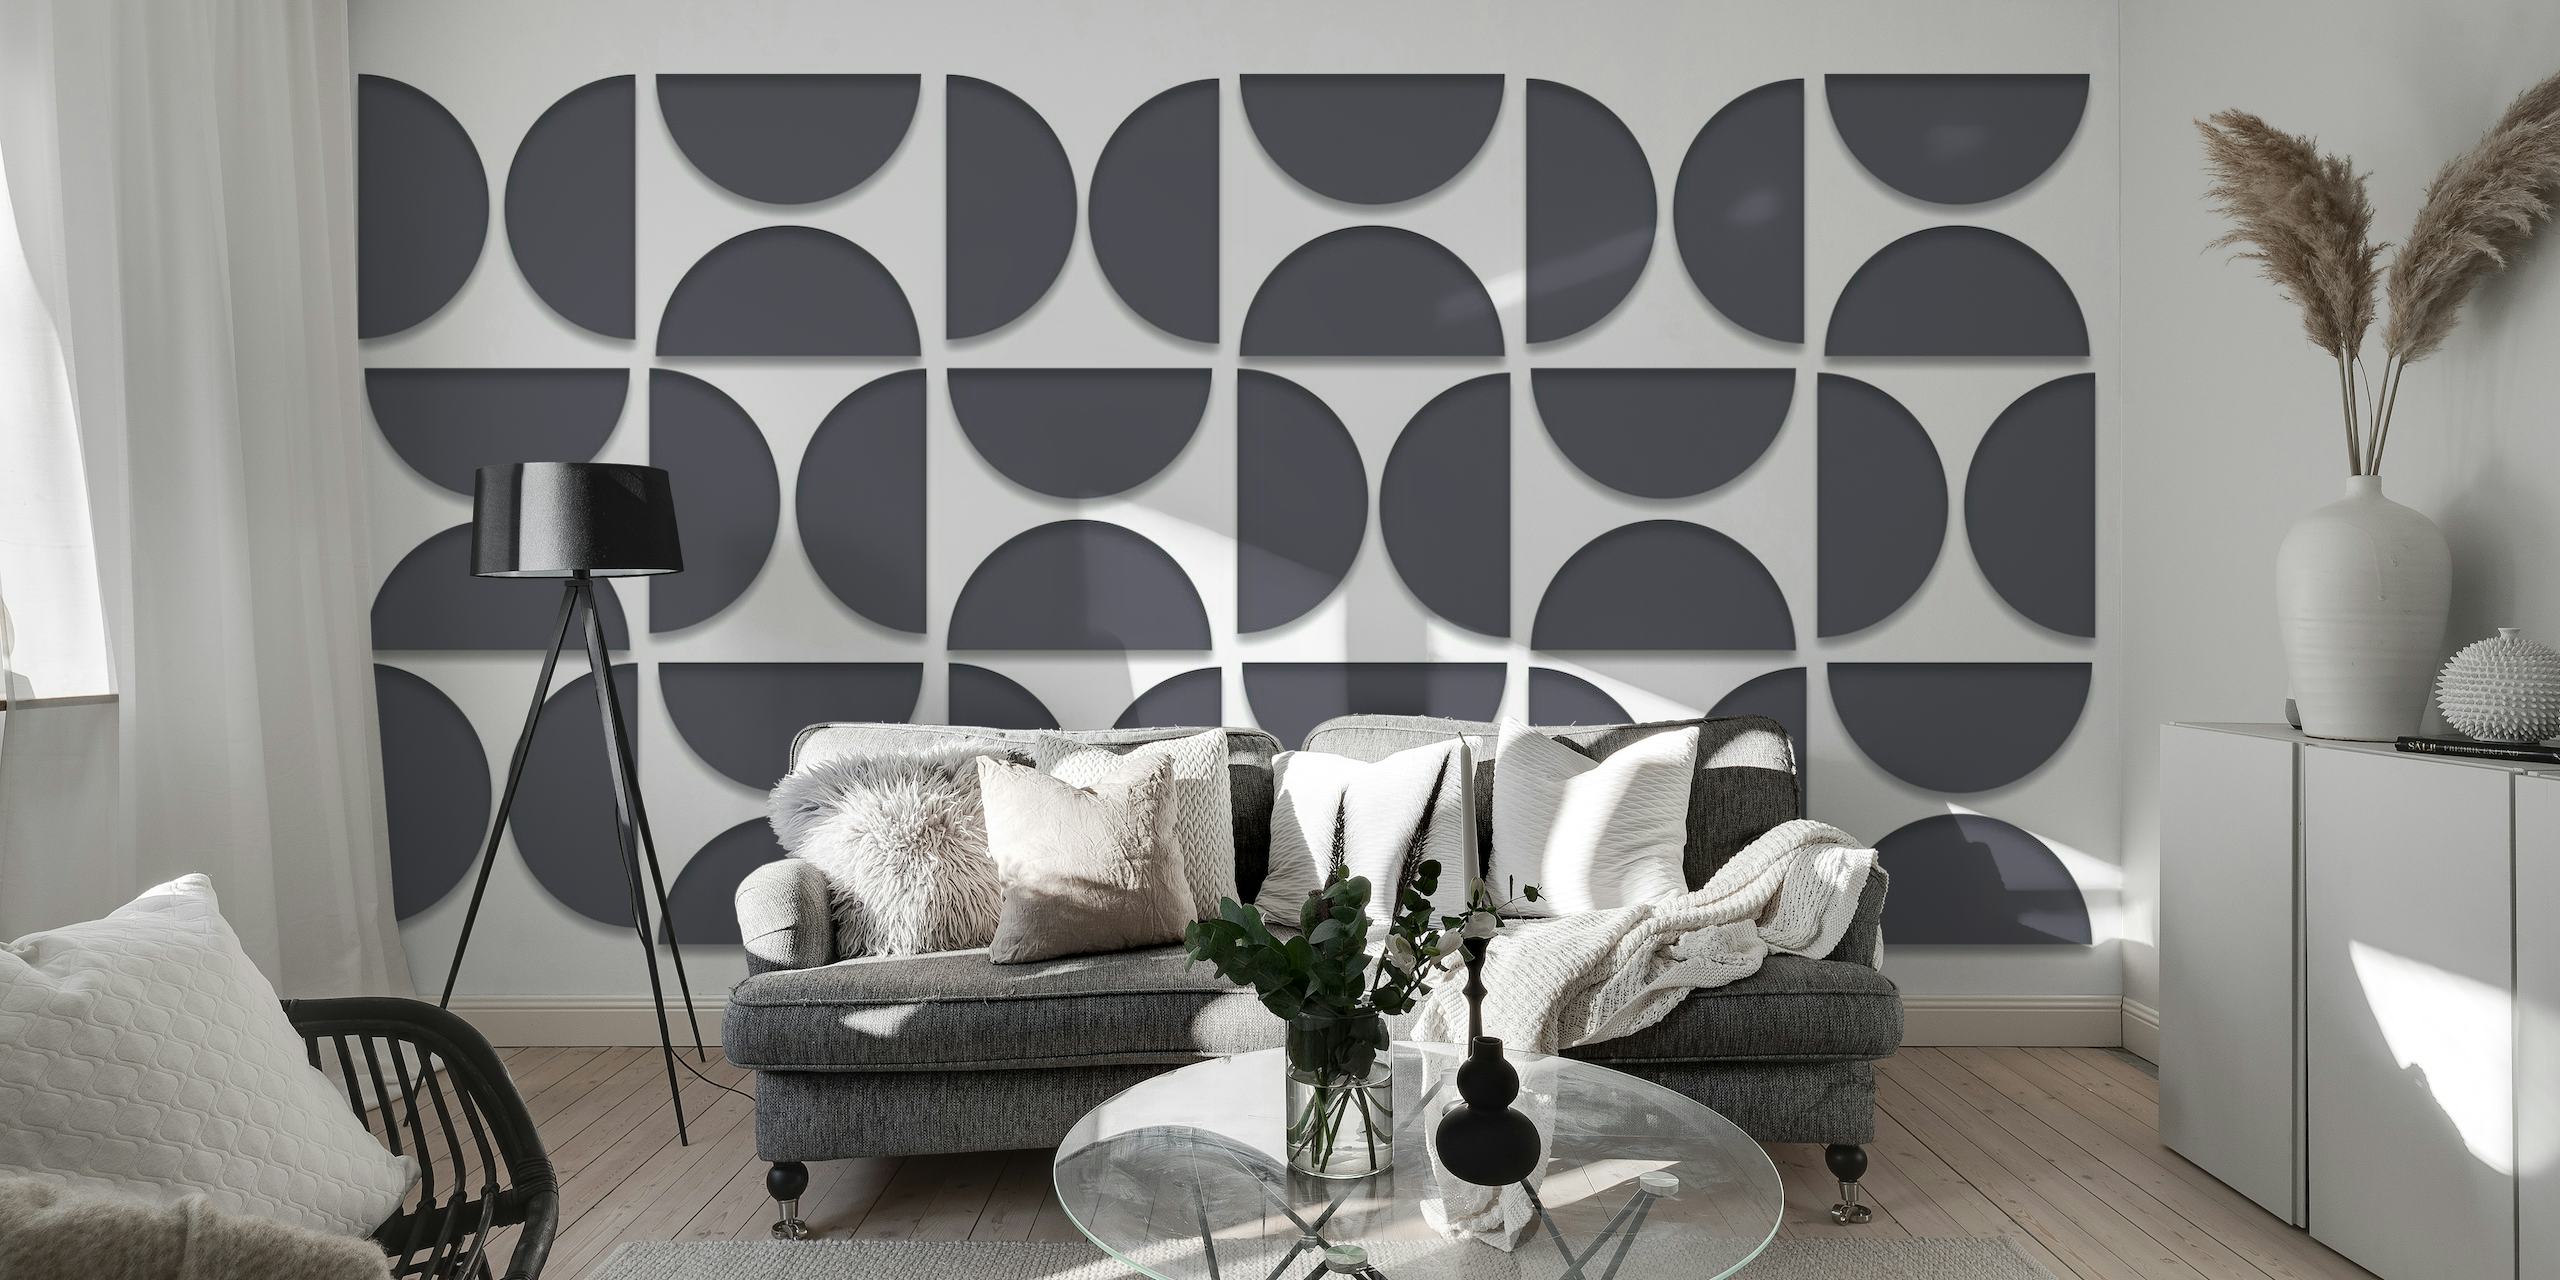 3D illusion Bauhaus-inspired geometric wall mural in black and white